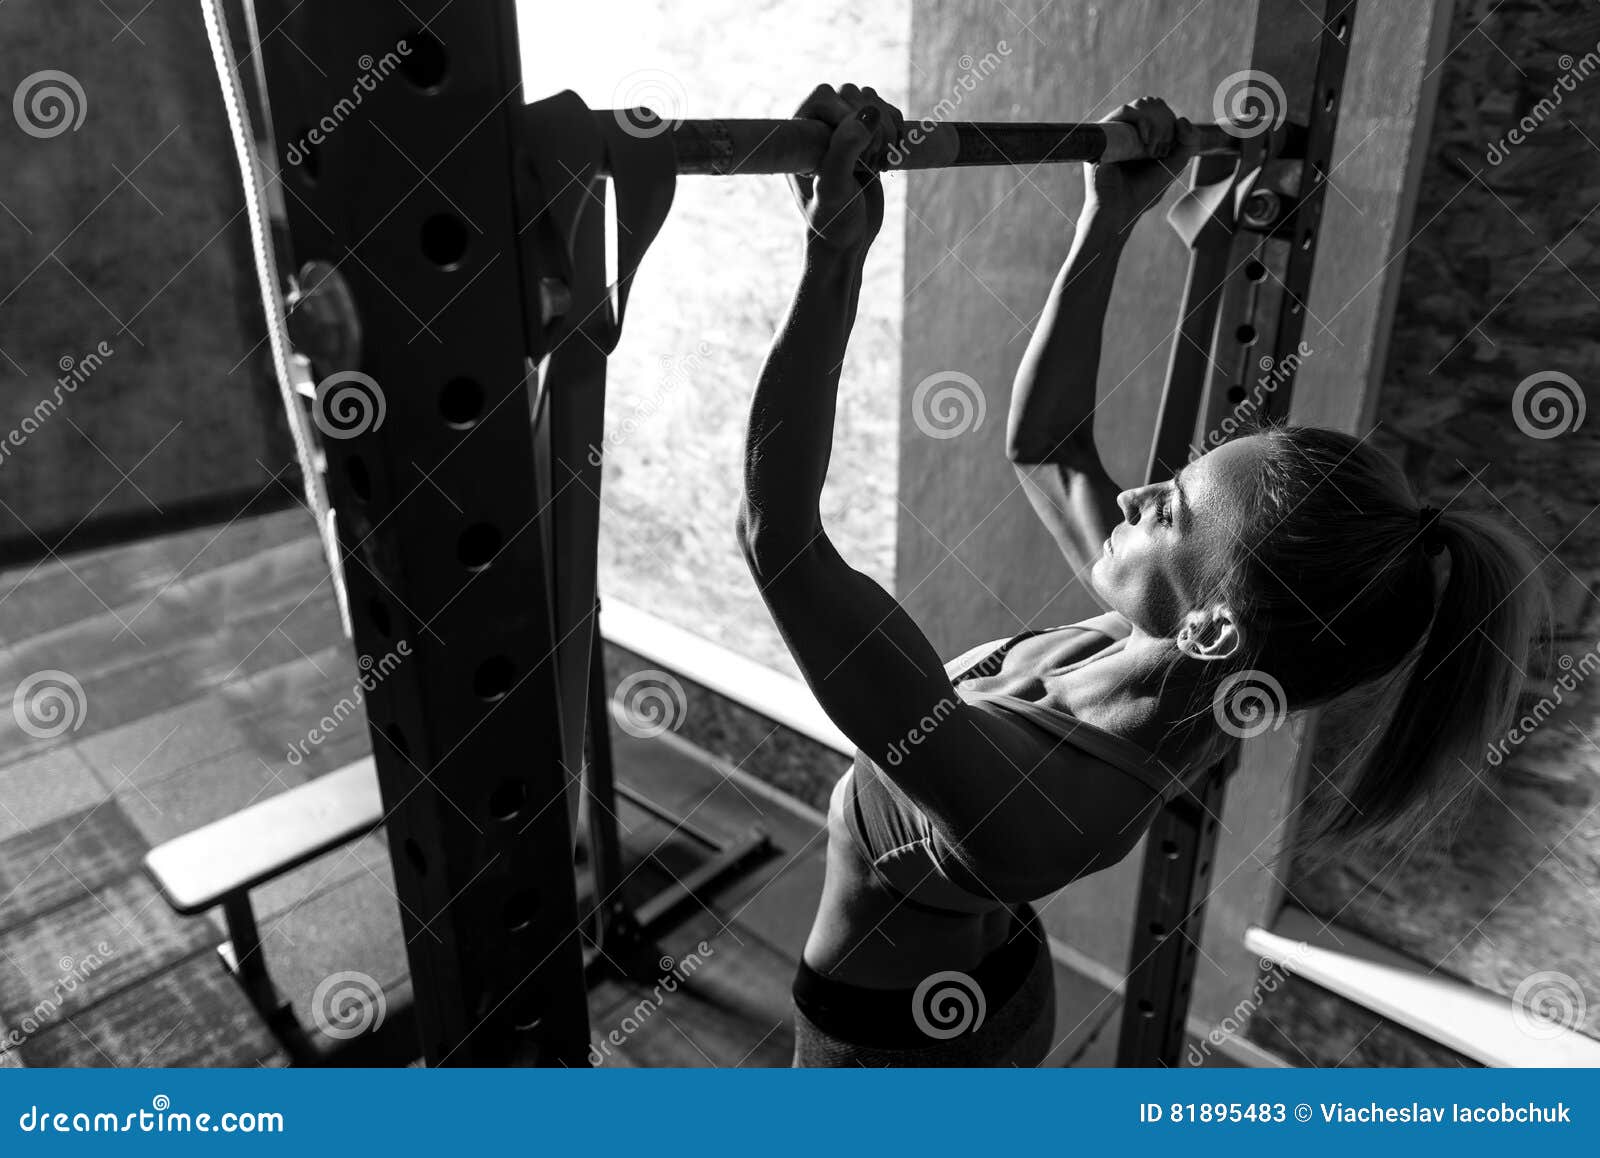 hard working persistent woman keeping herself fit